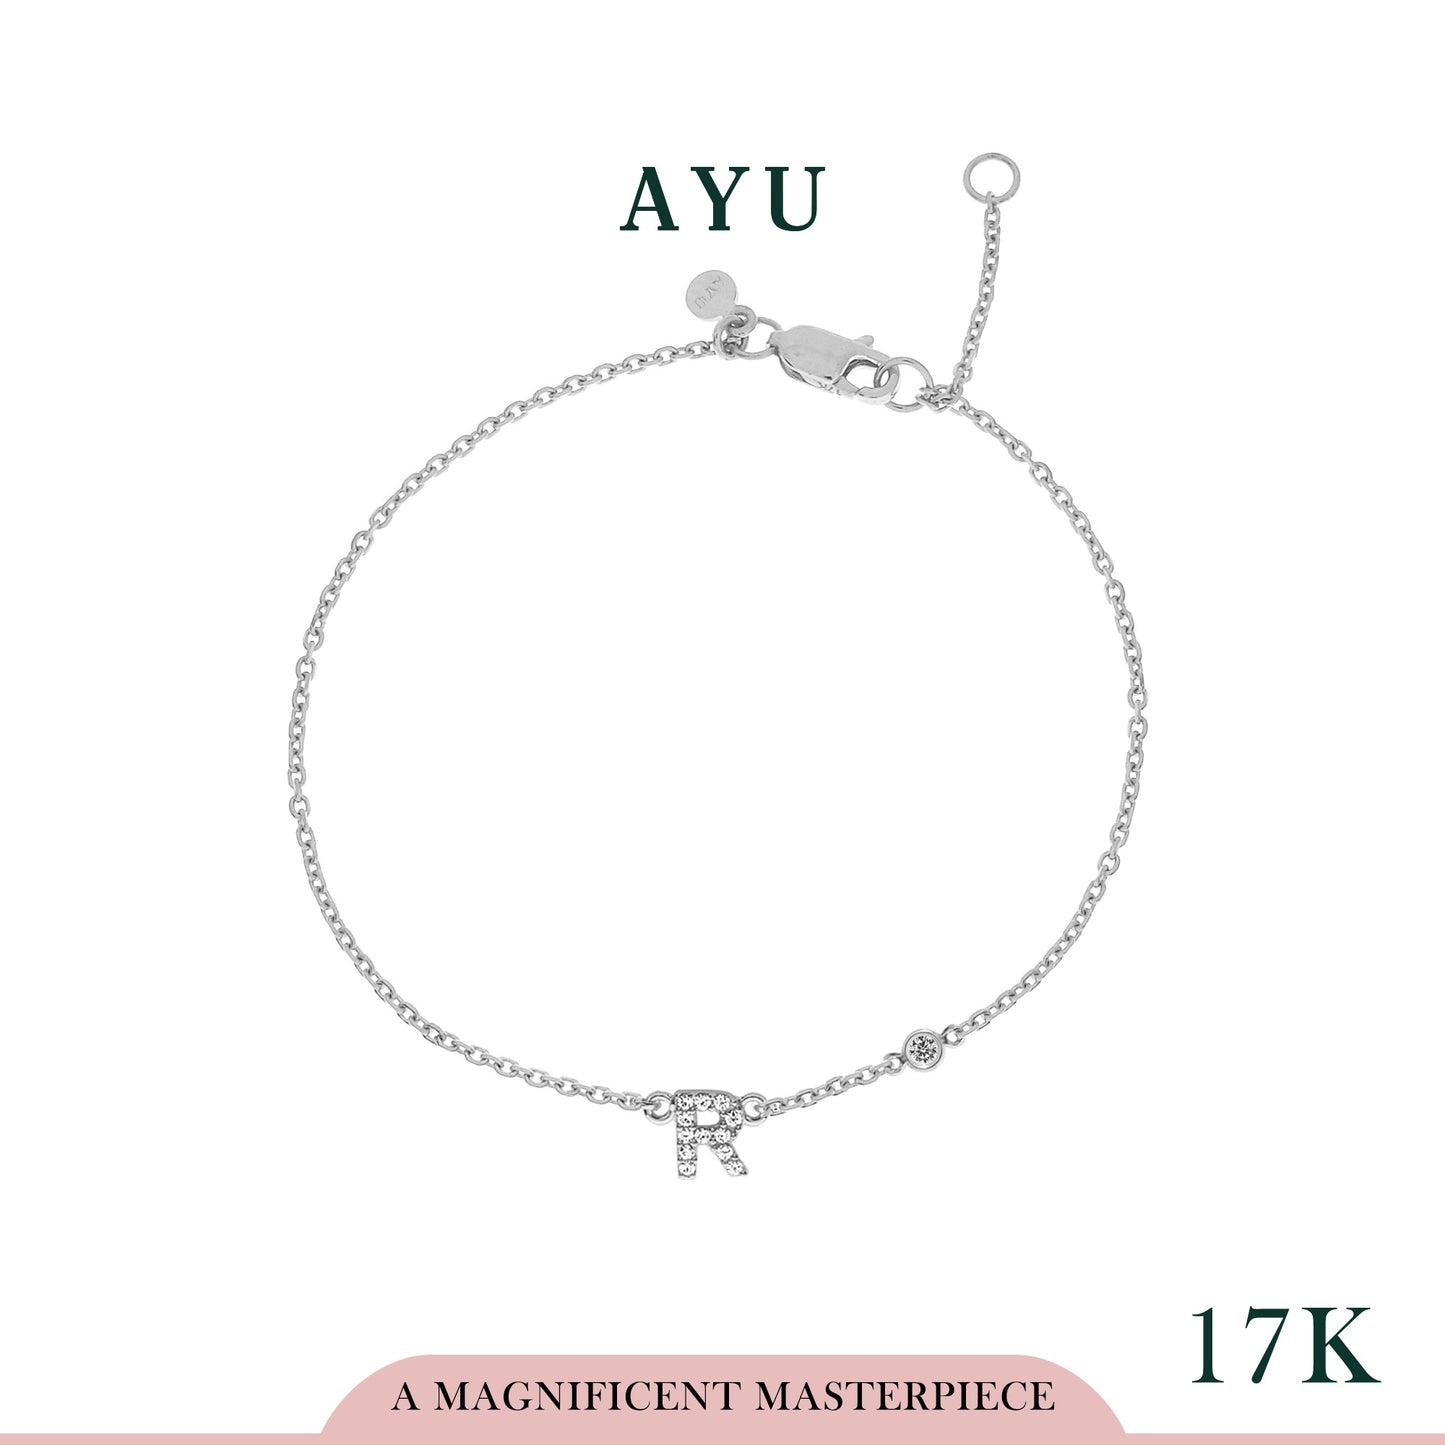 AYU Pave Initial With Bezel Chain Bracelet 17k White Gold